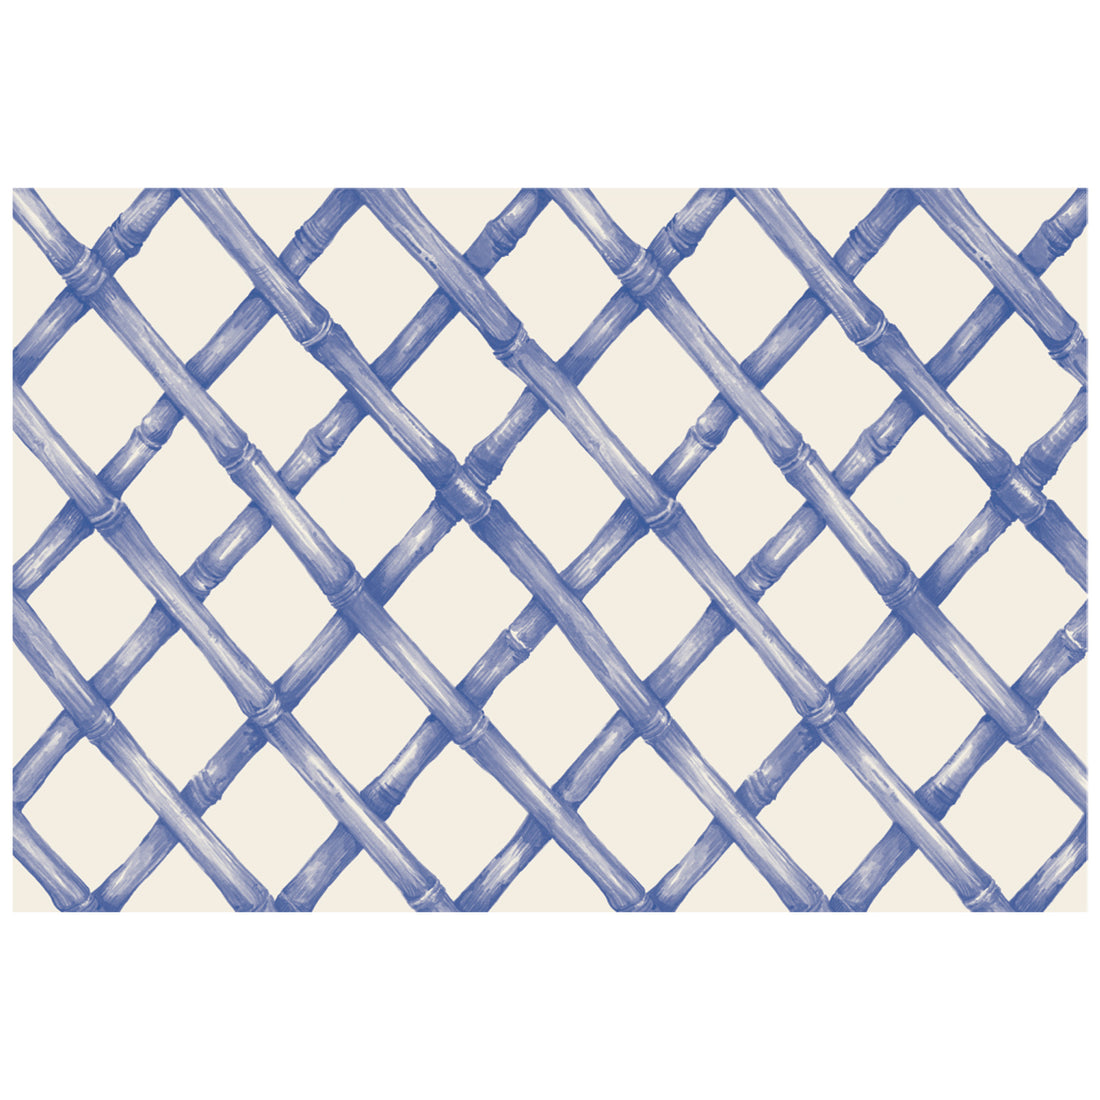 A diagonal woven bamboo pattern in medium blue on a white background.